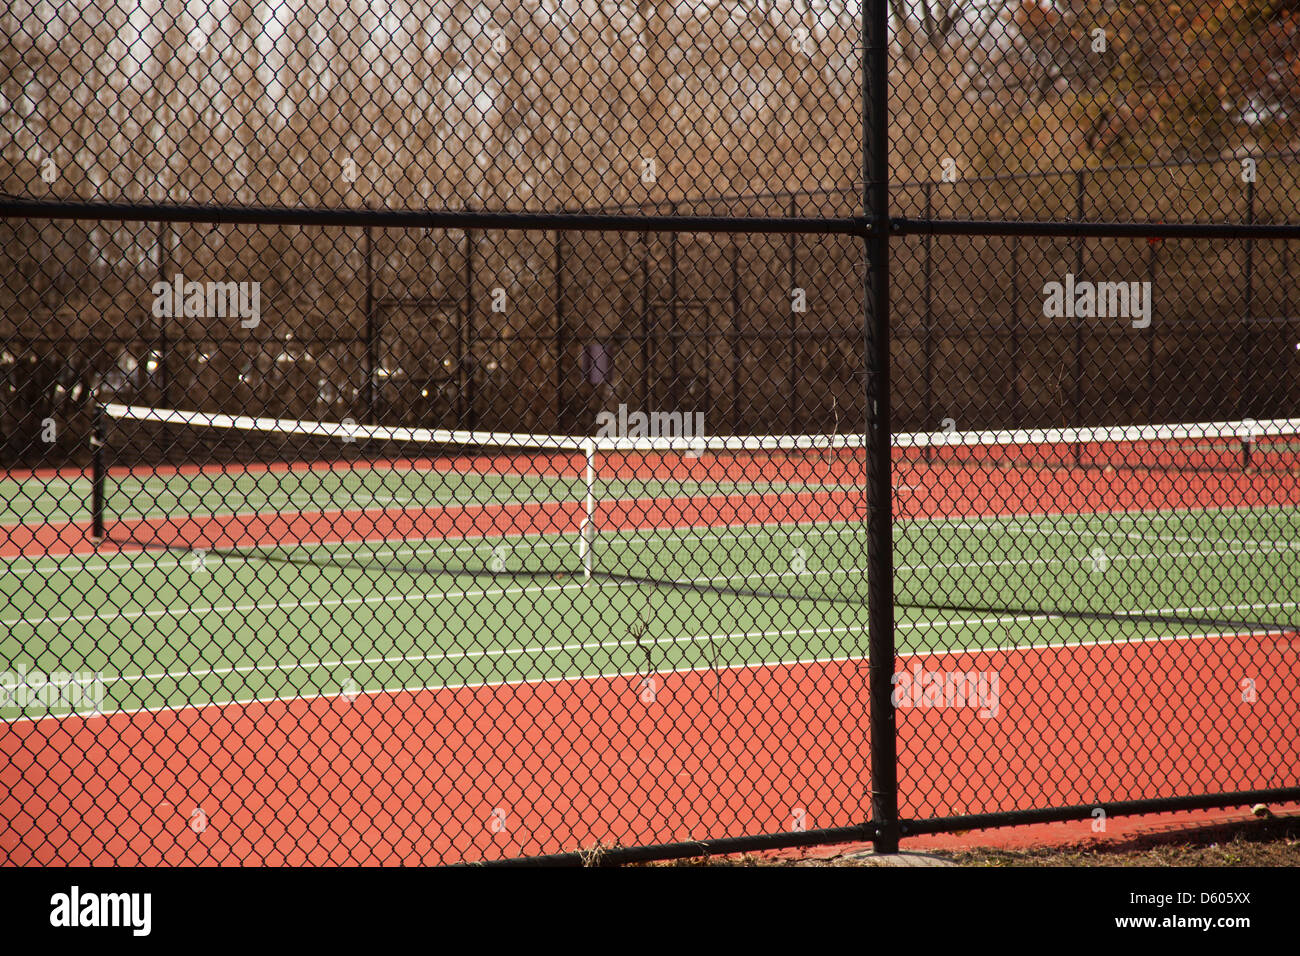 clay tennis courts with fence Stock Photo